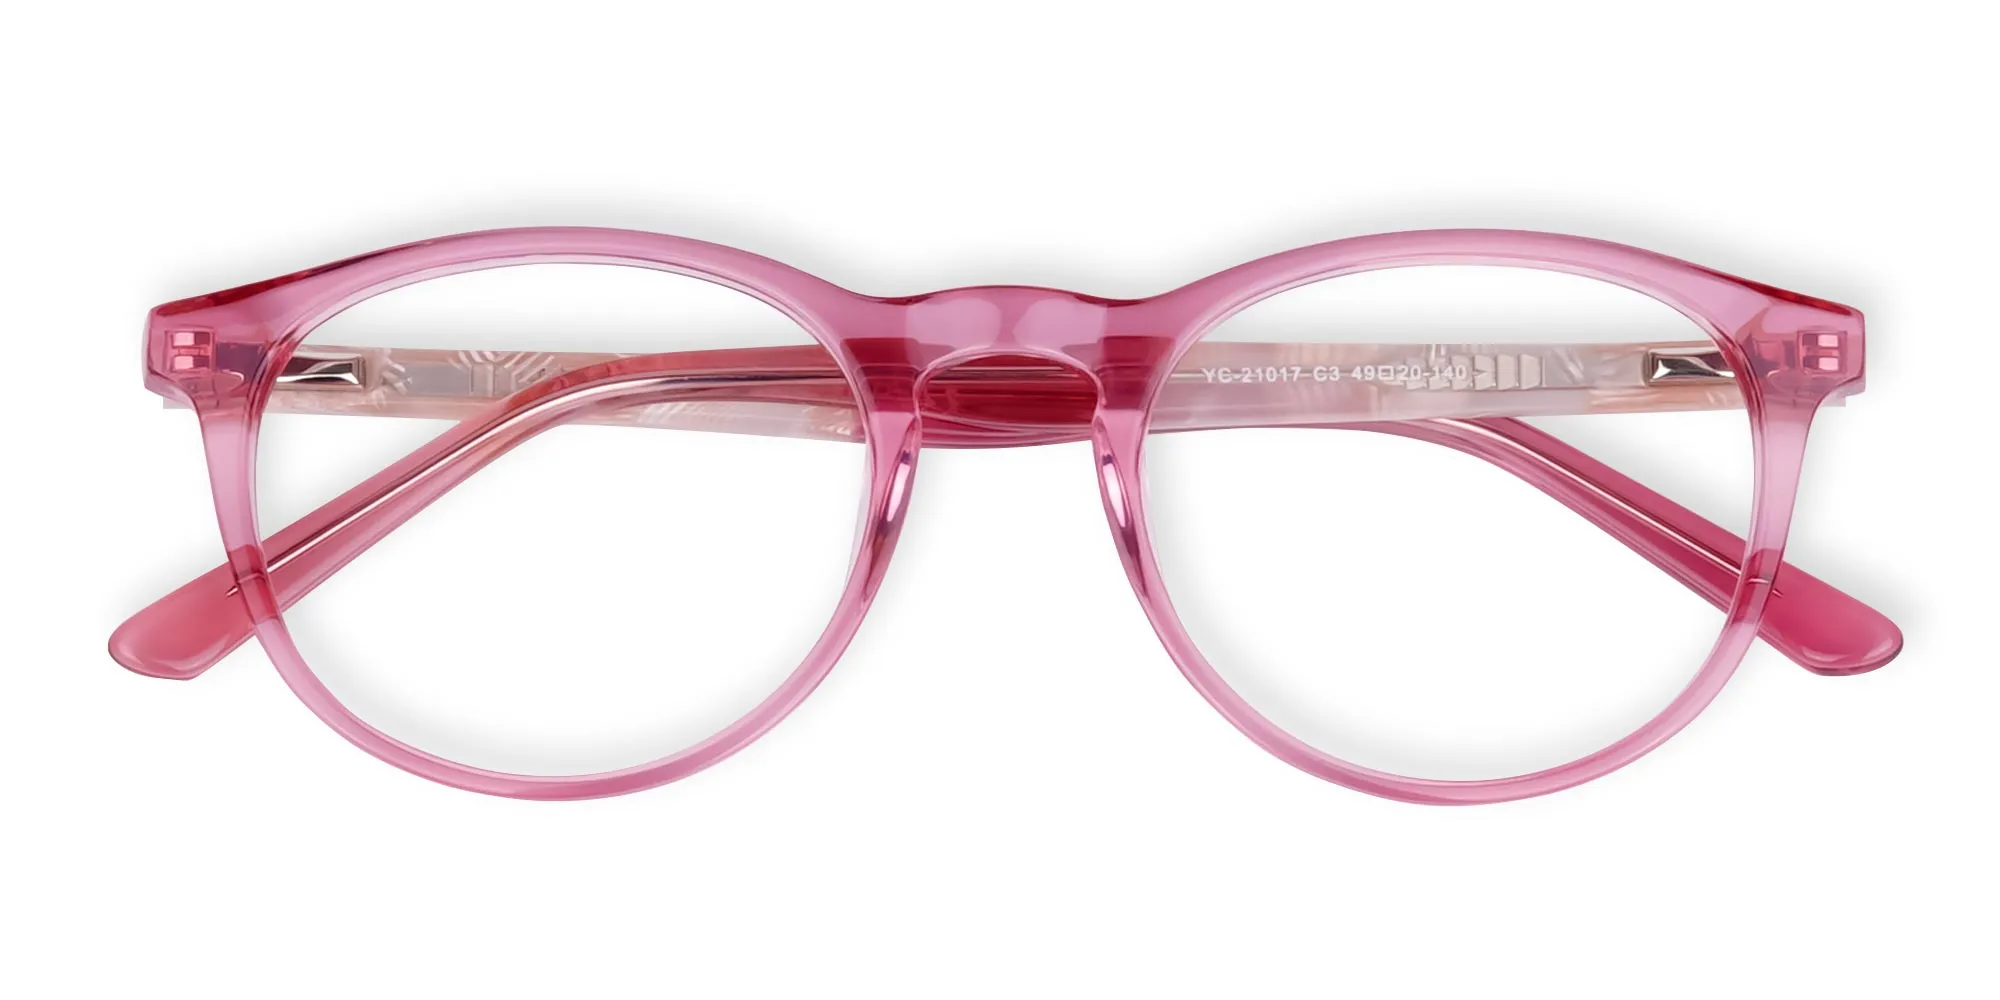 Crystal and Pink Round Glasses Frame-2